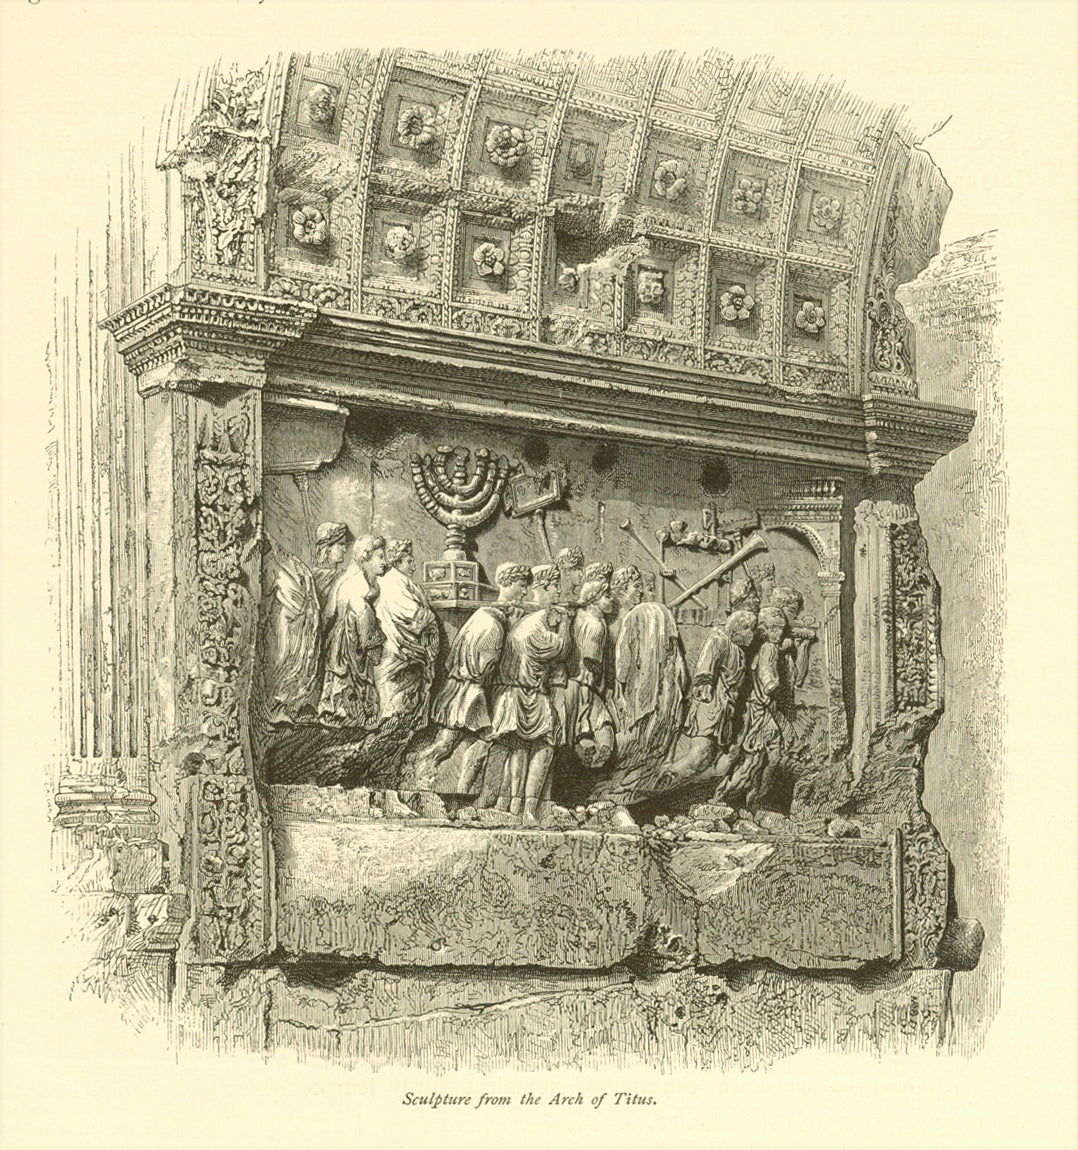 "Sculpture from the Arch of Titus"  Wood engraving ca 1875 on a page of text.  Reverse side is printed with information about Rome.  Original antique print  interior design, wall decoration, ideas, idea, gift ideas, present, vintage, charming, special, decoration, home interior, living room design